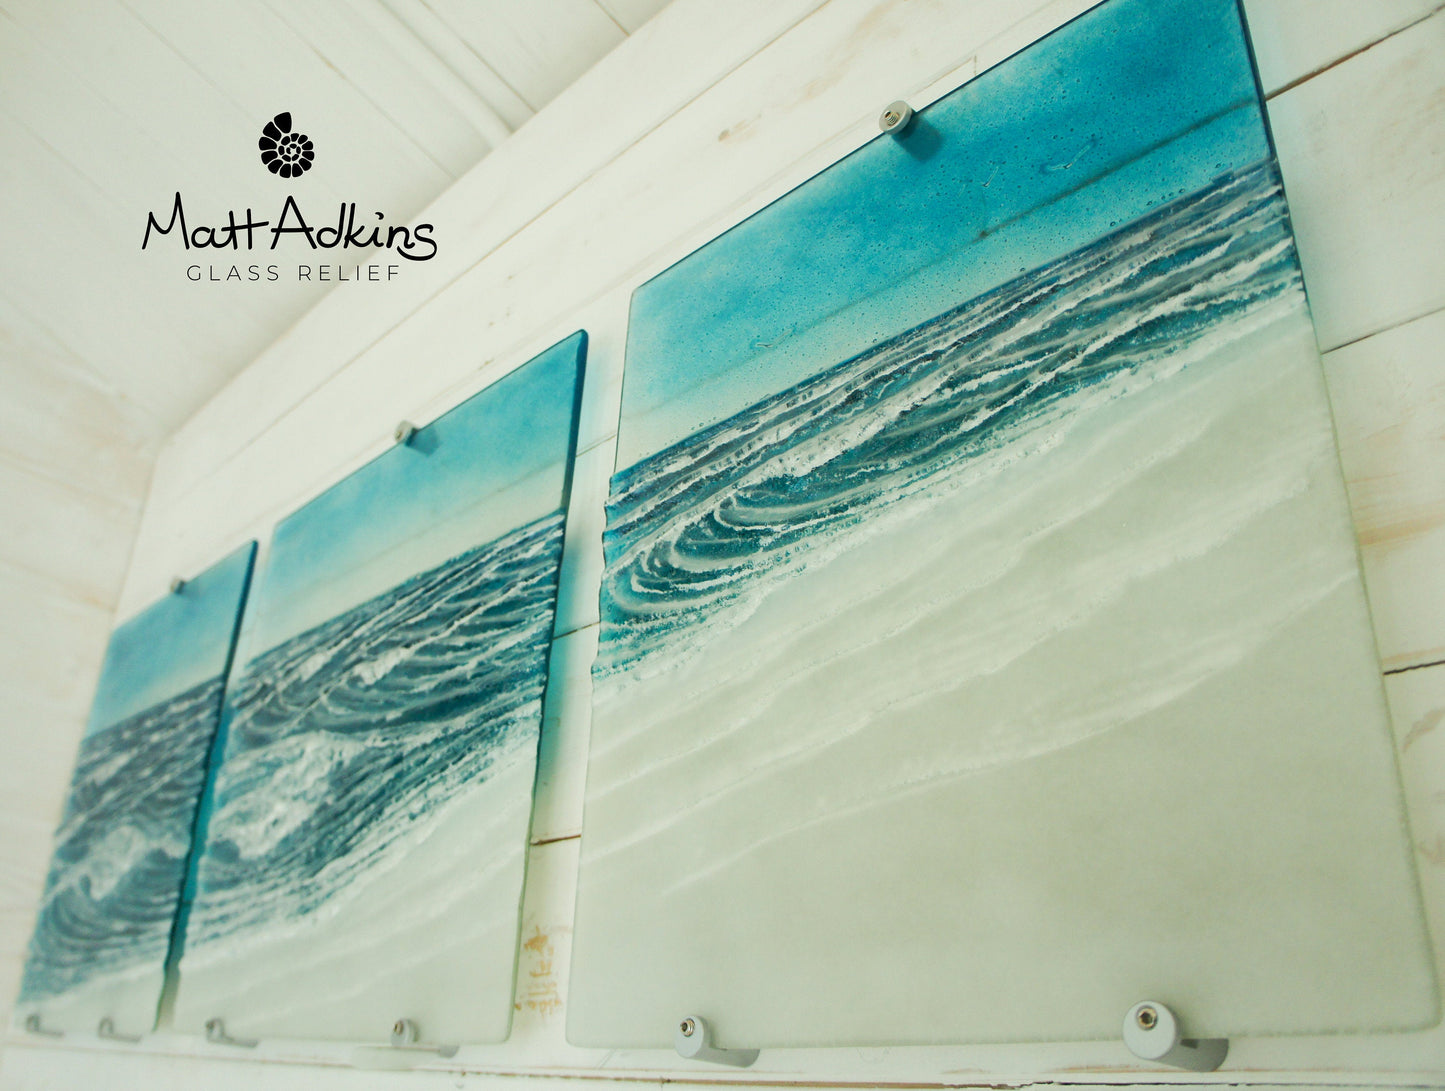 Triptych Coastal Wave Wall Panels - Left&Right 35x40cm (14x16")/Middle 40x40cm (16x16") with 9 fixings